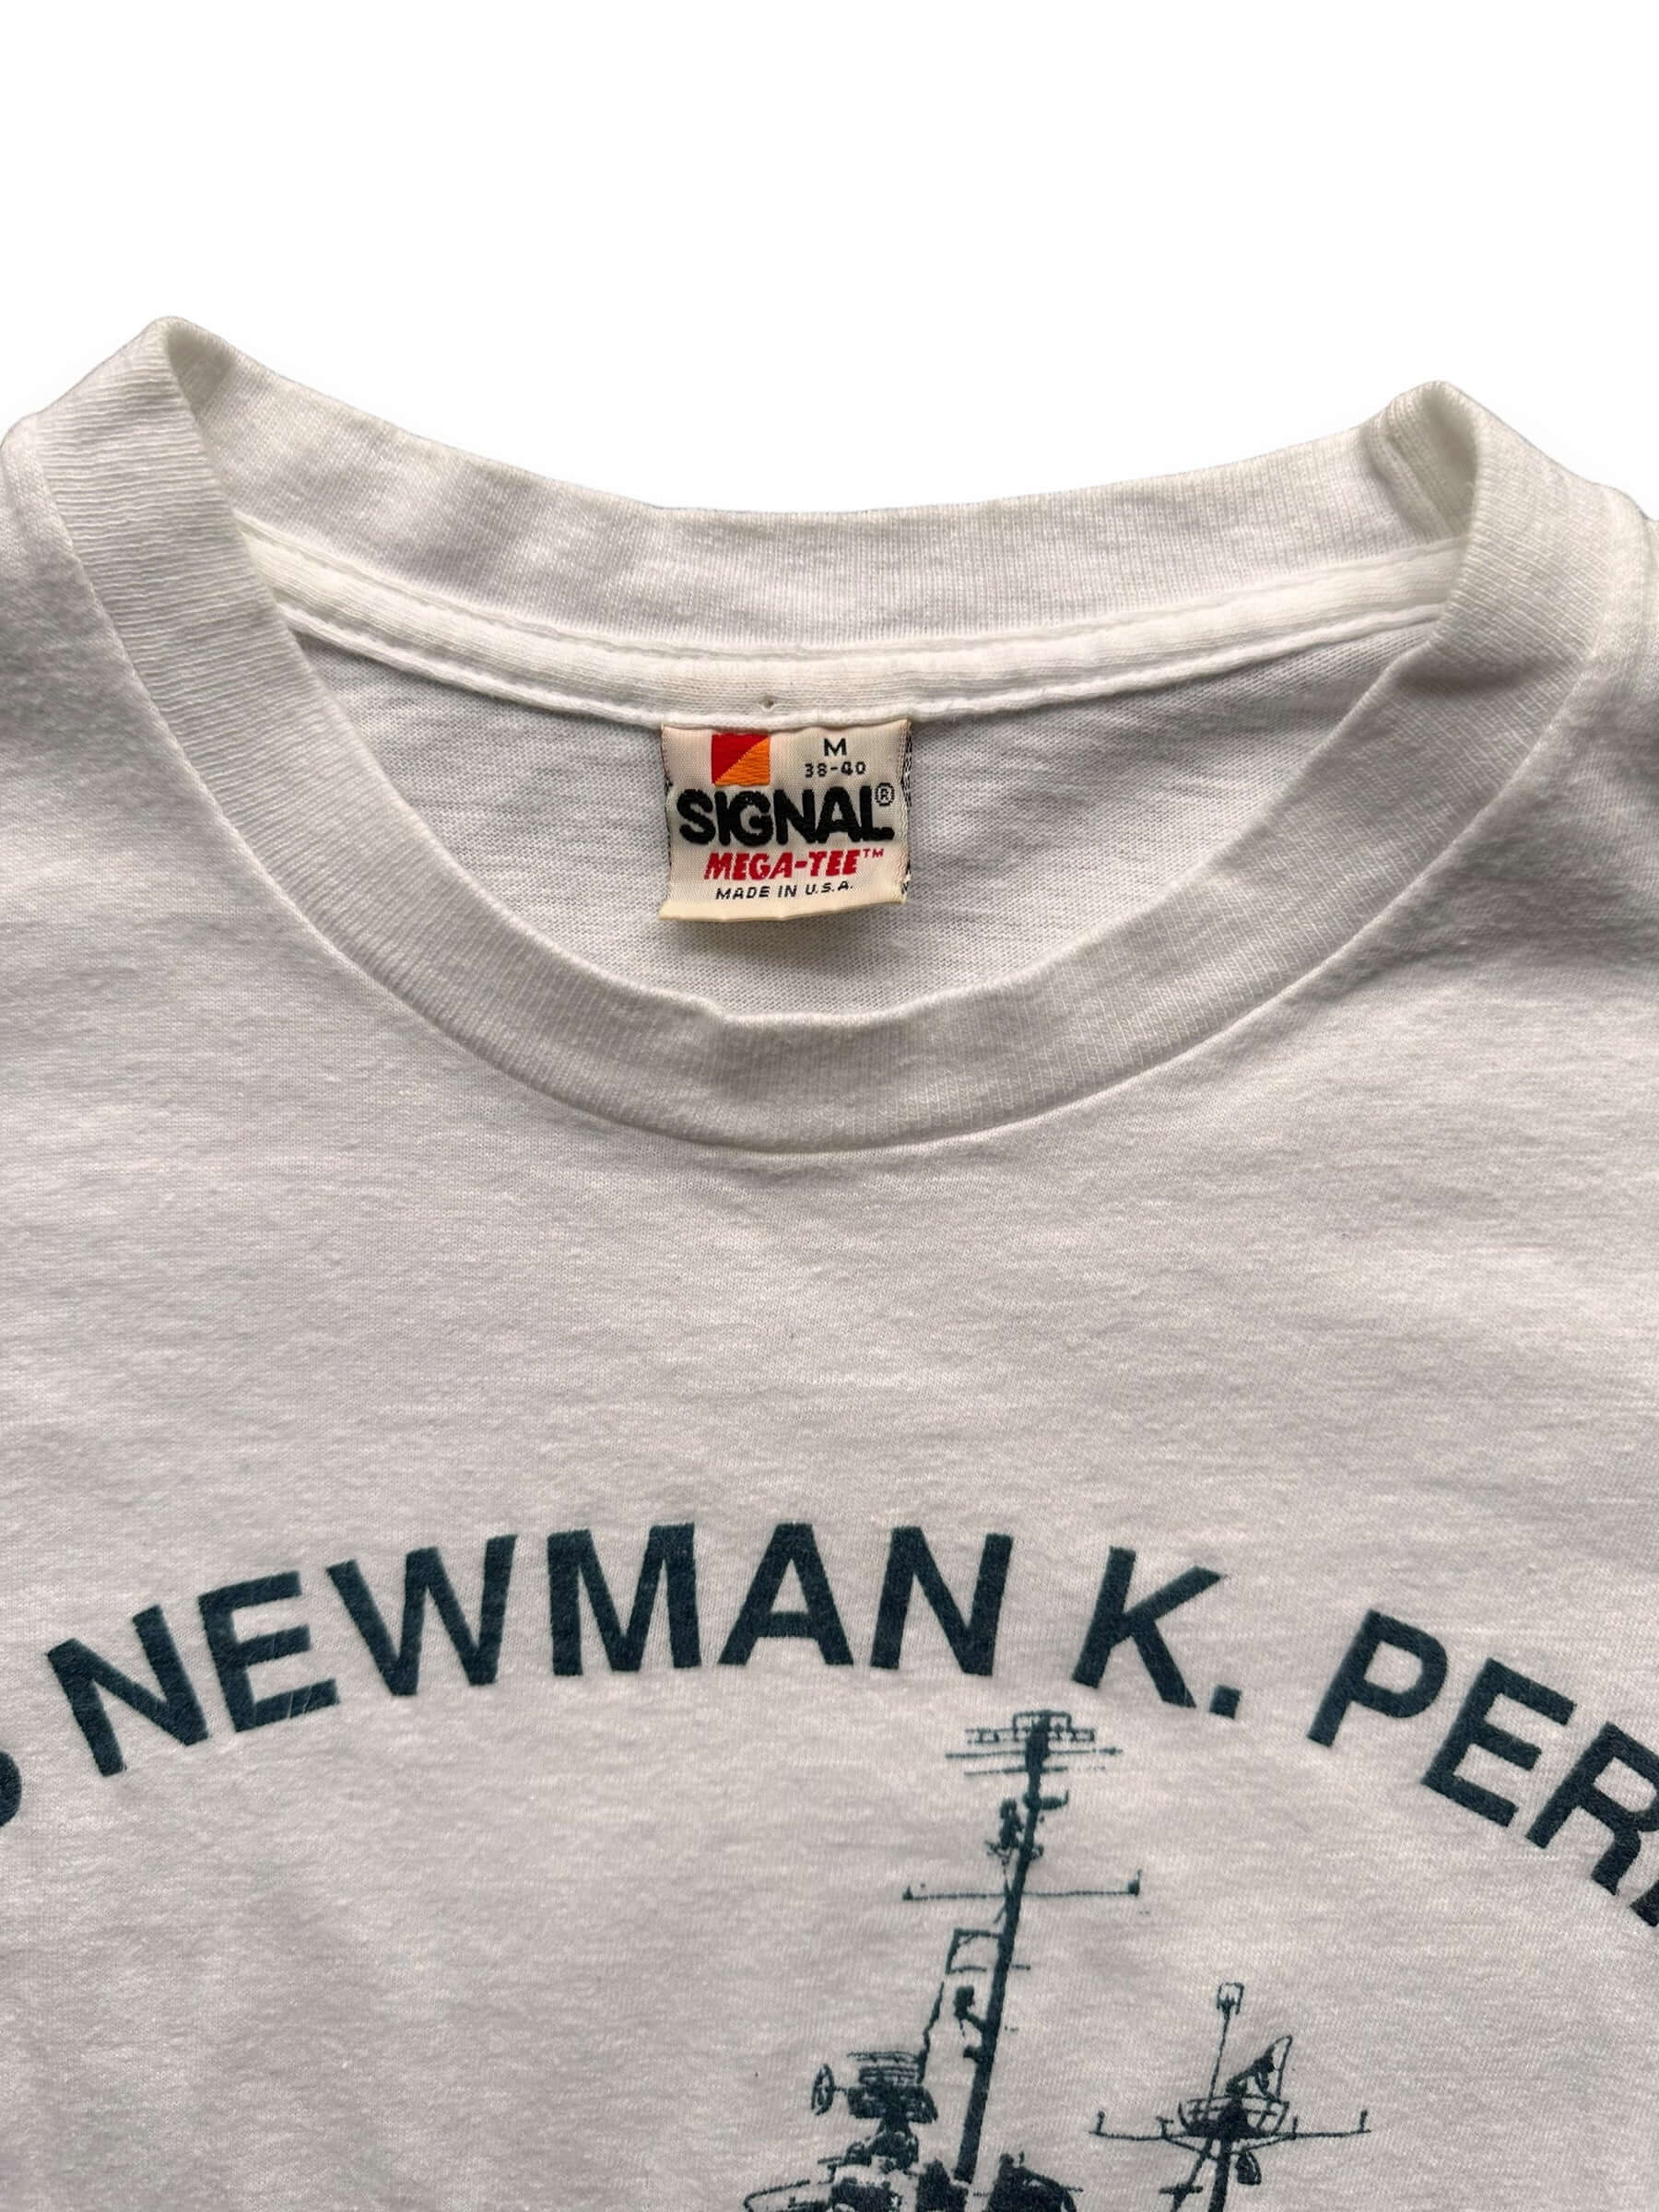 Signal Tag View of Vintage USS Newman K Perry Tee SZ M | Vintage Military T-Shirts Seattle